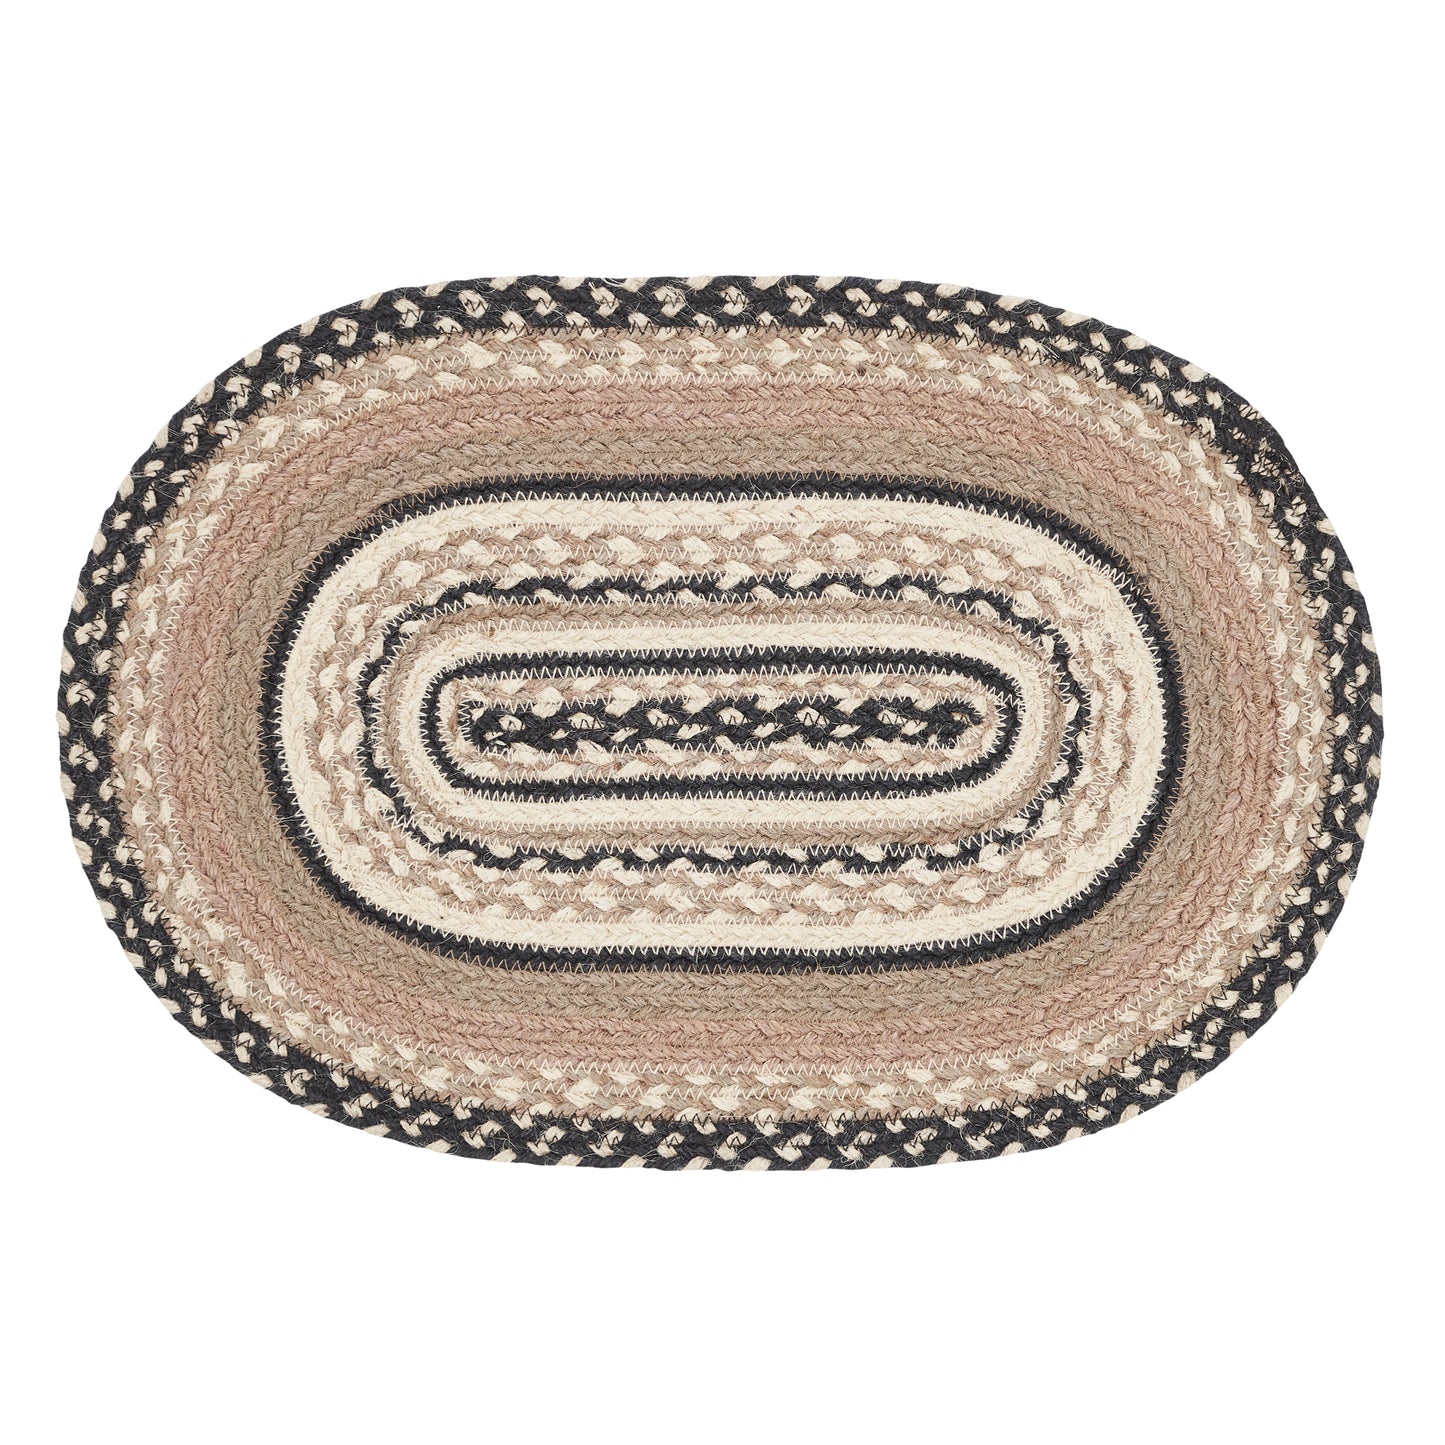 81448-Sawyer-Mill-Charcoal-Creme-Jute-Oval-Placemat-12x18-image-4